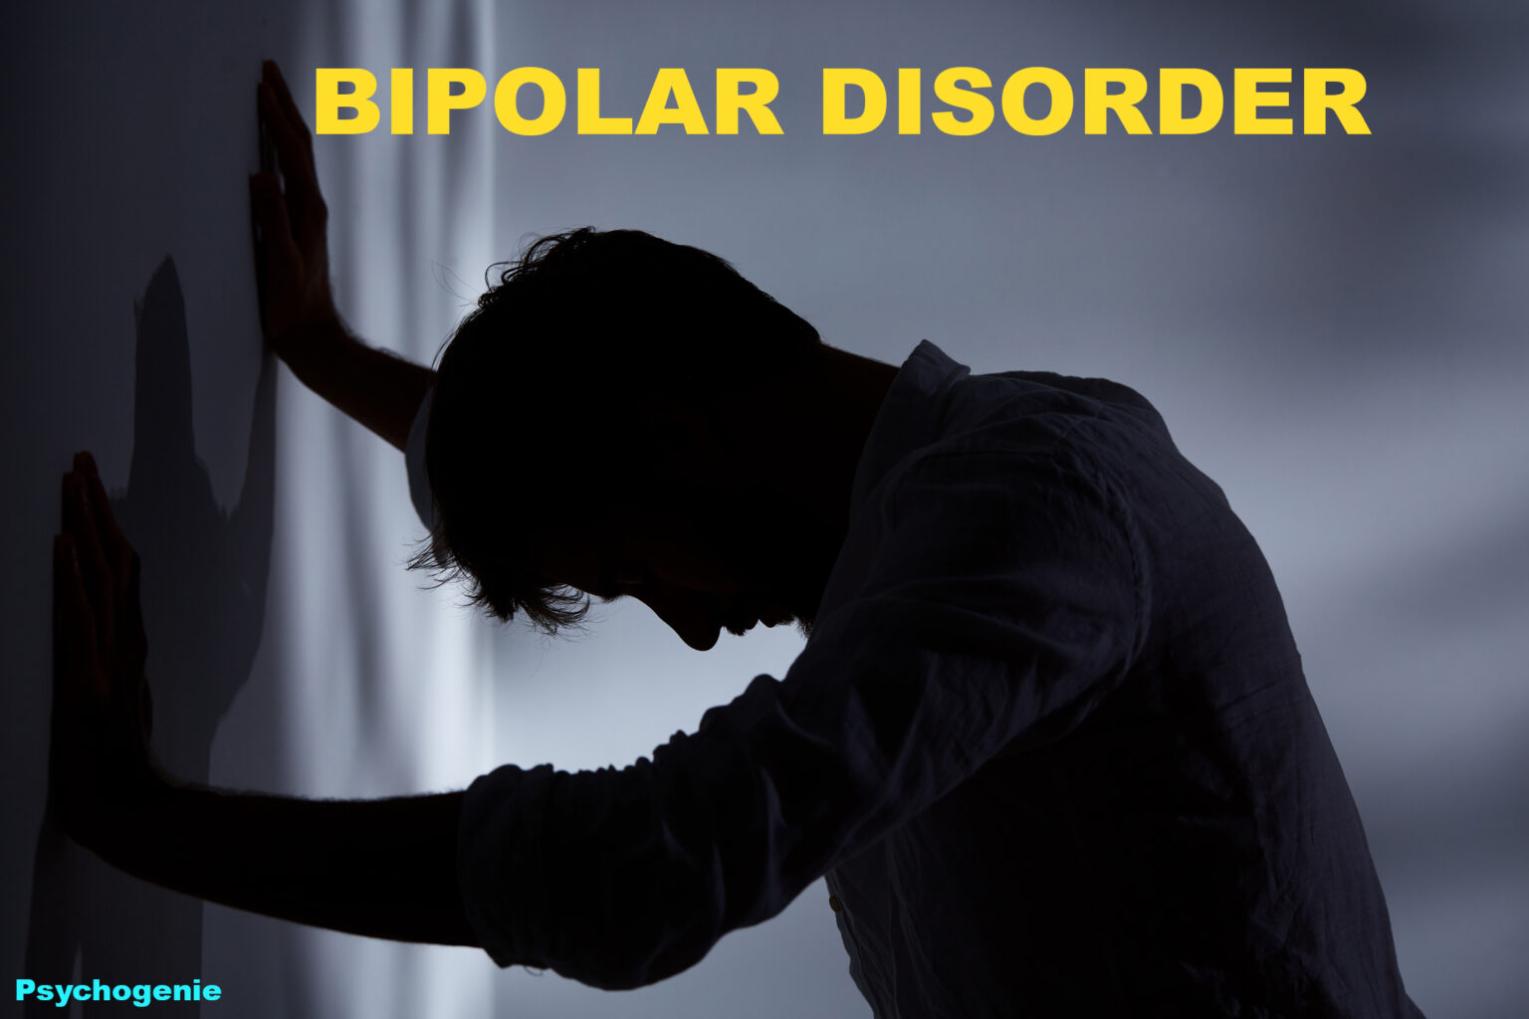 How Long Does It Take for Bipolar Disorder Medications to Work?